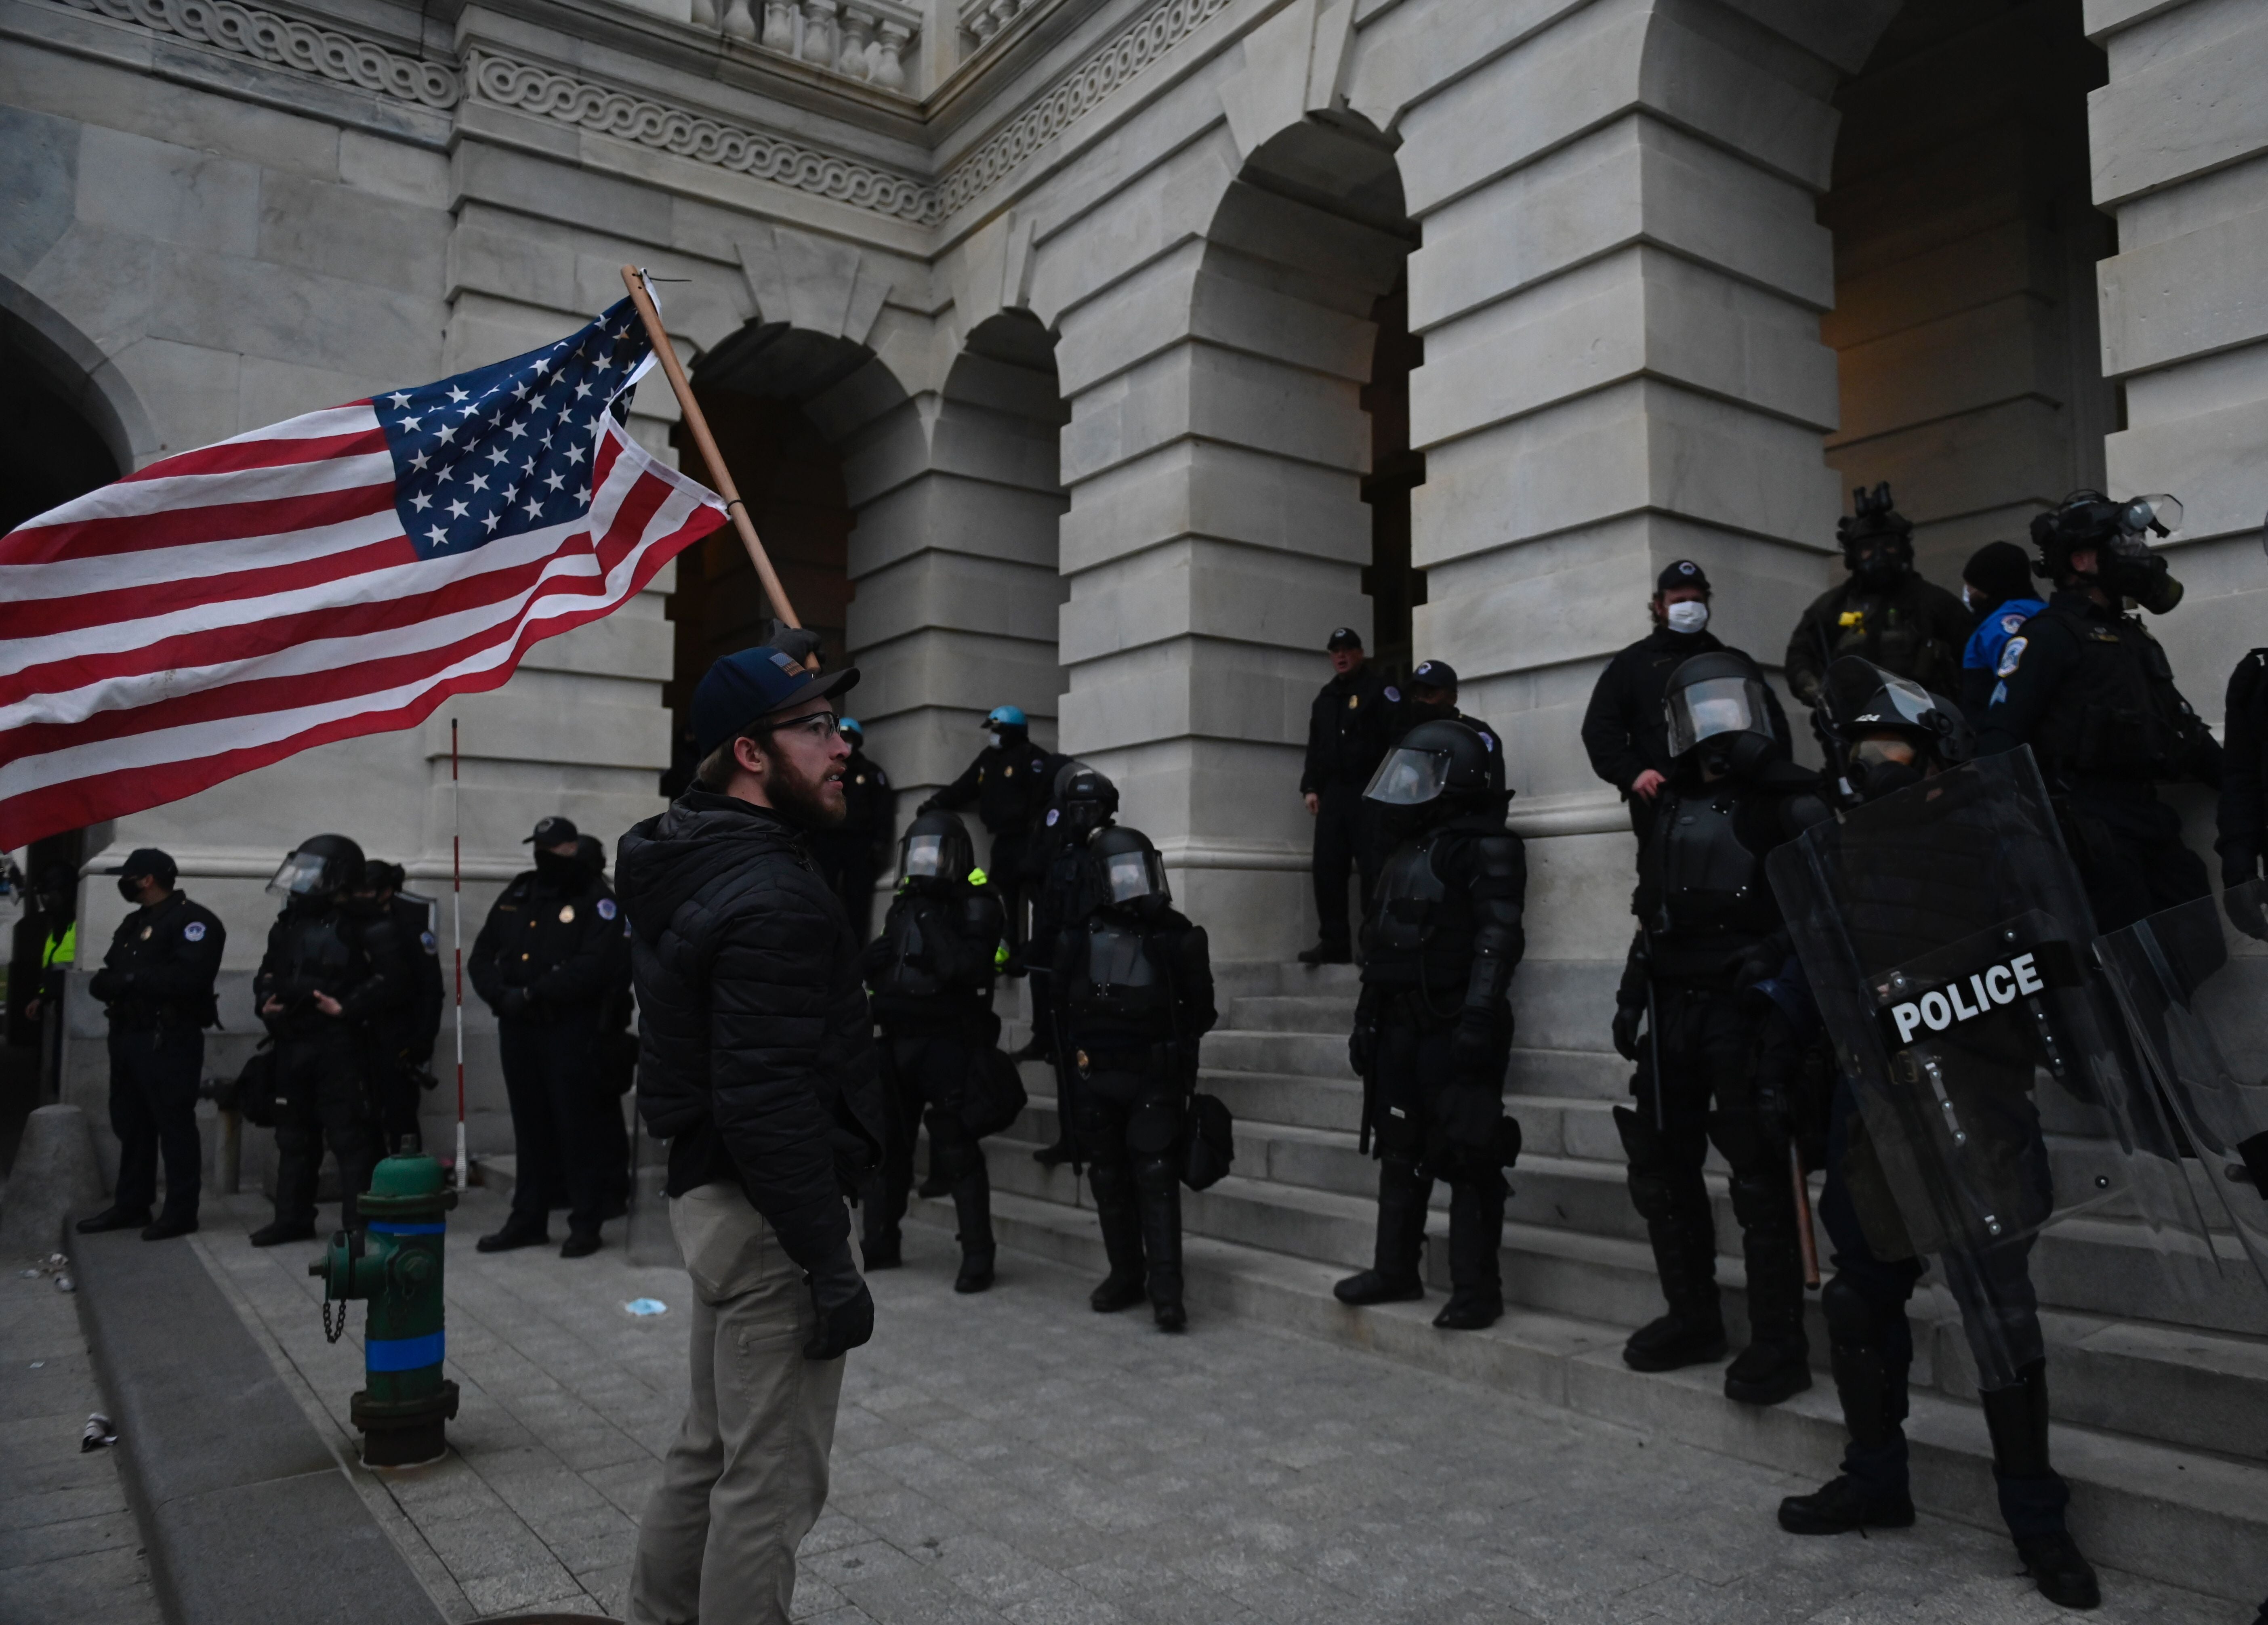 Police look on as a Trump supporter approaches the US Capitol